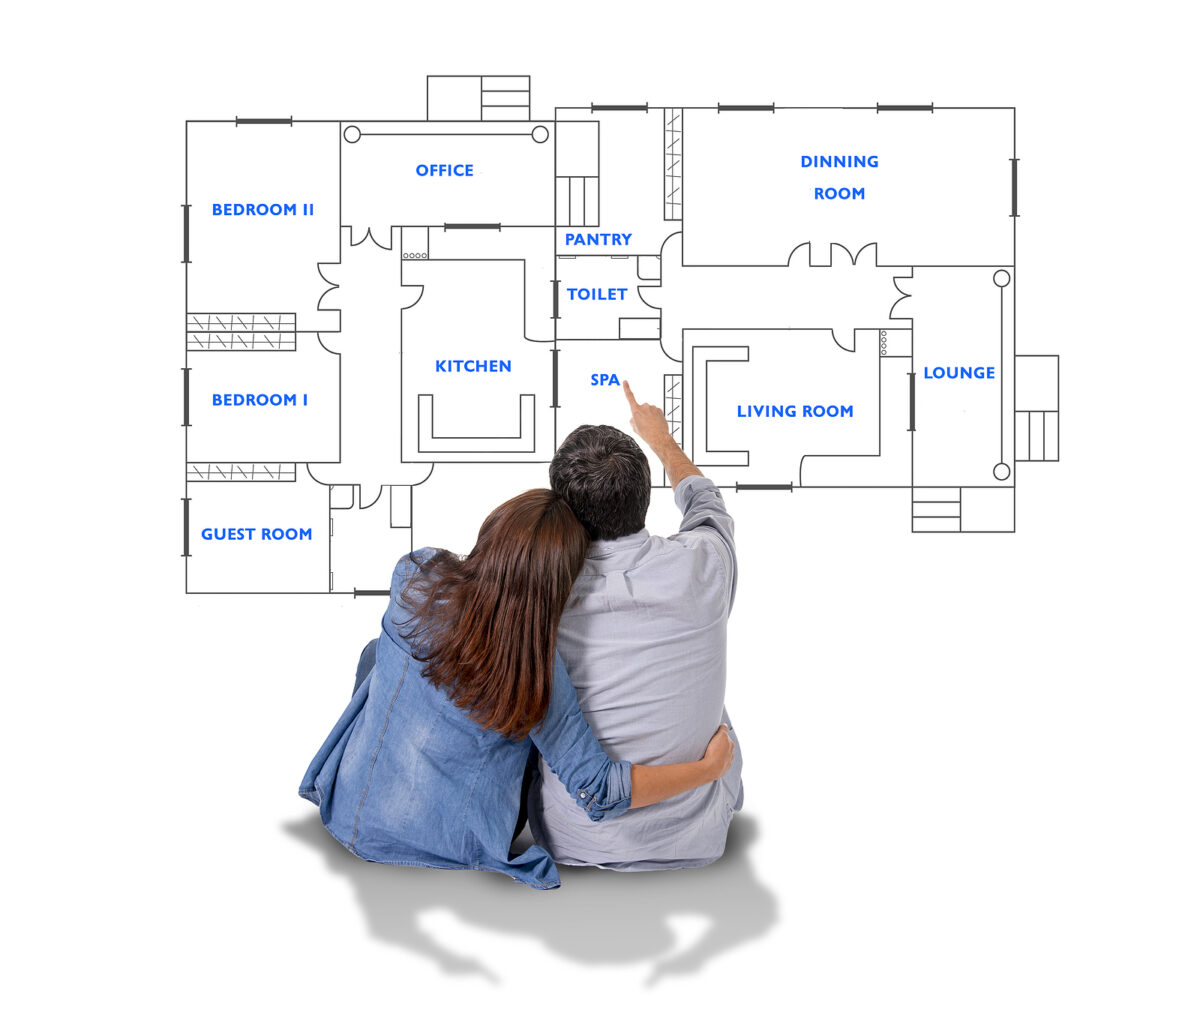 Finding Your Dream Home: Which Home Type is Perfect for You?